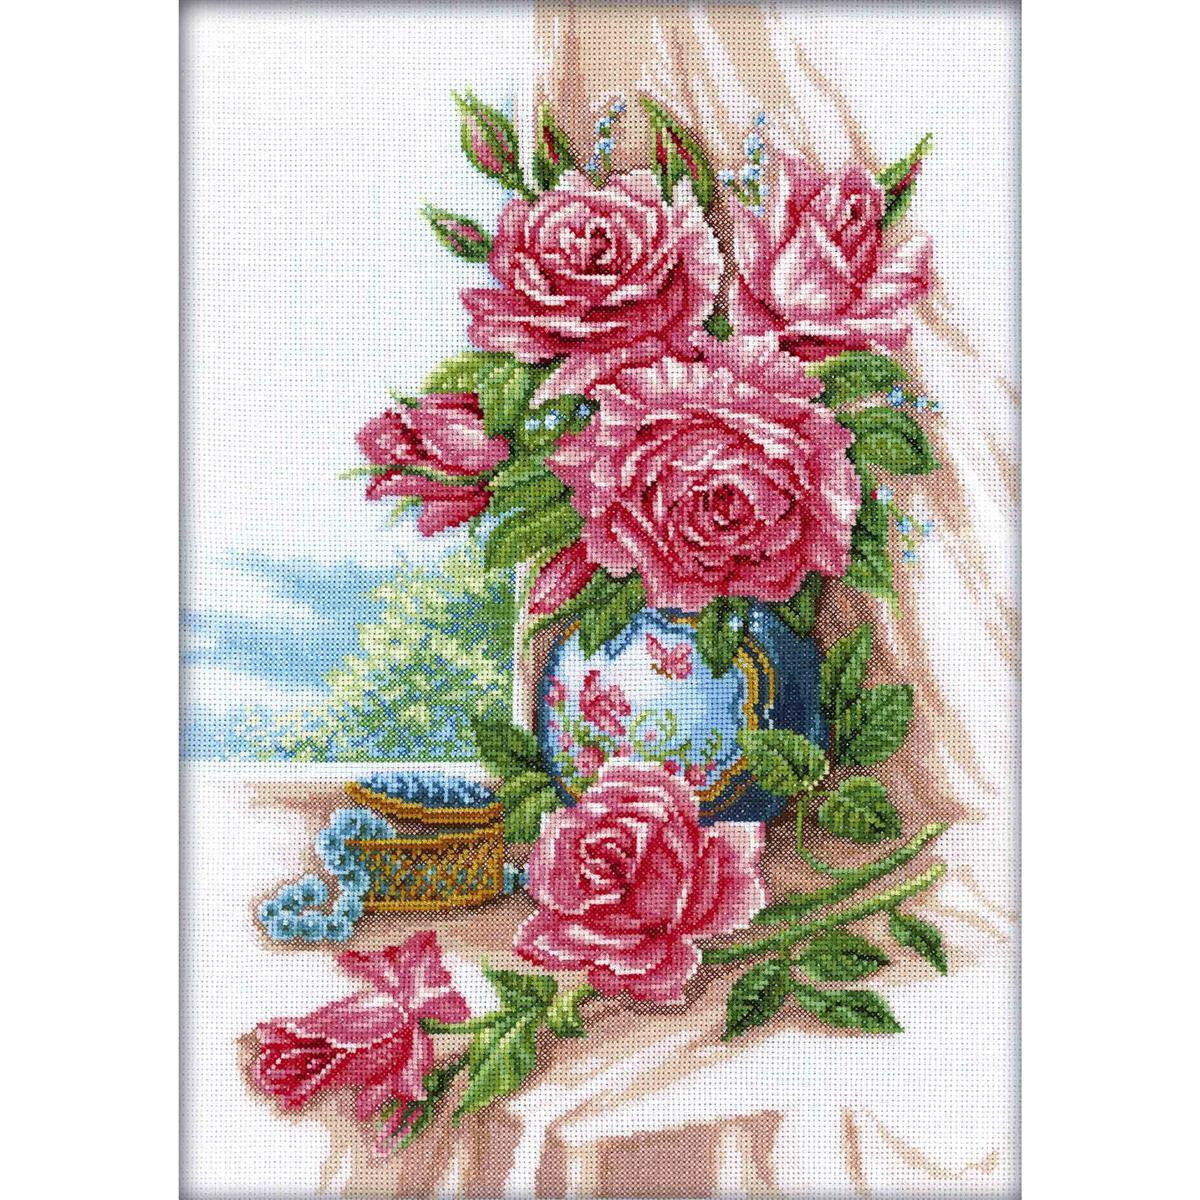 RTO counted Cross Stitch Kit "Gorgeous roses"...